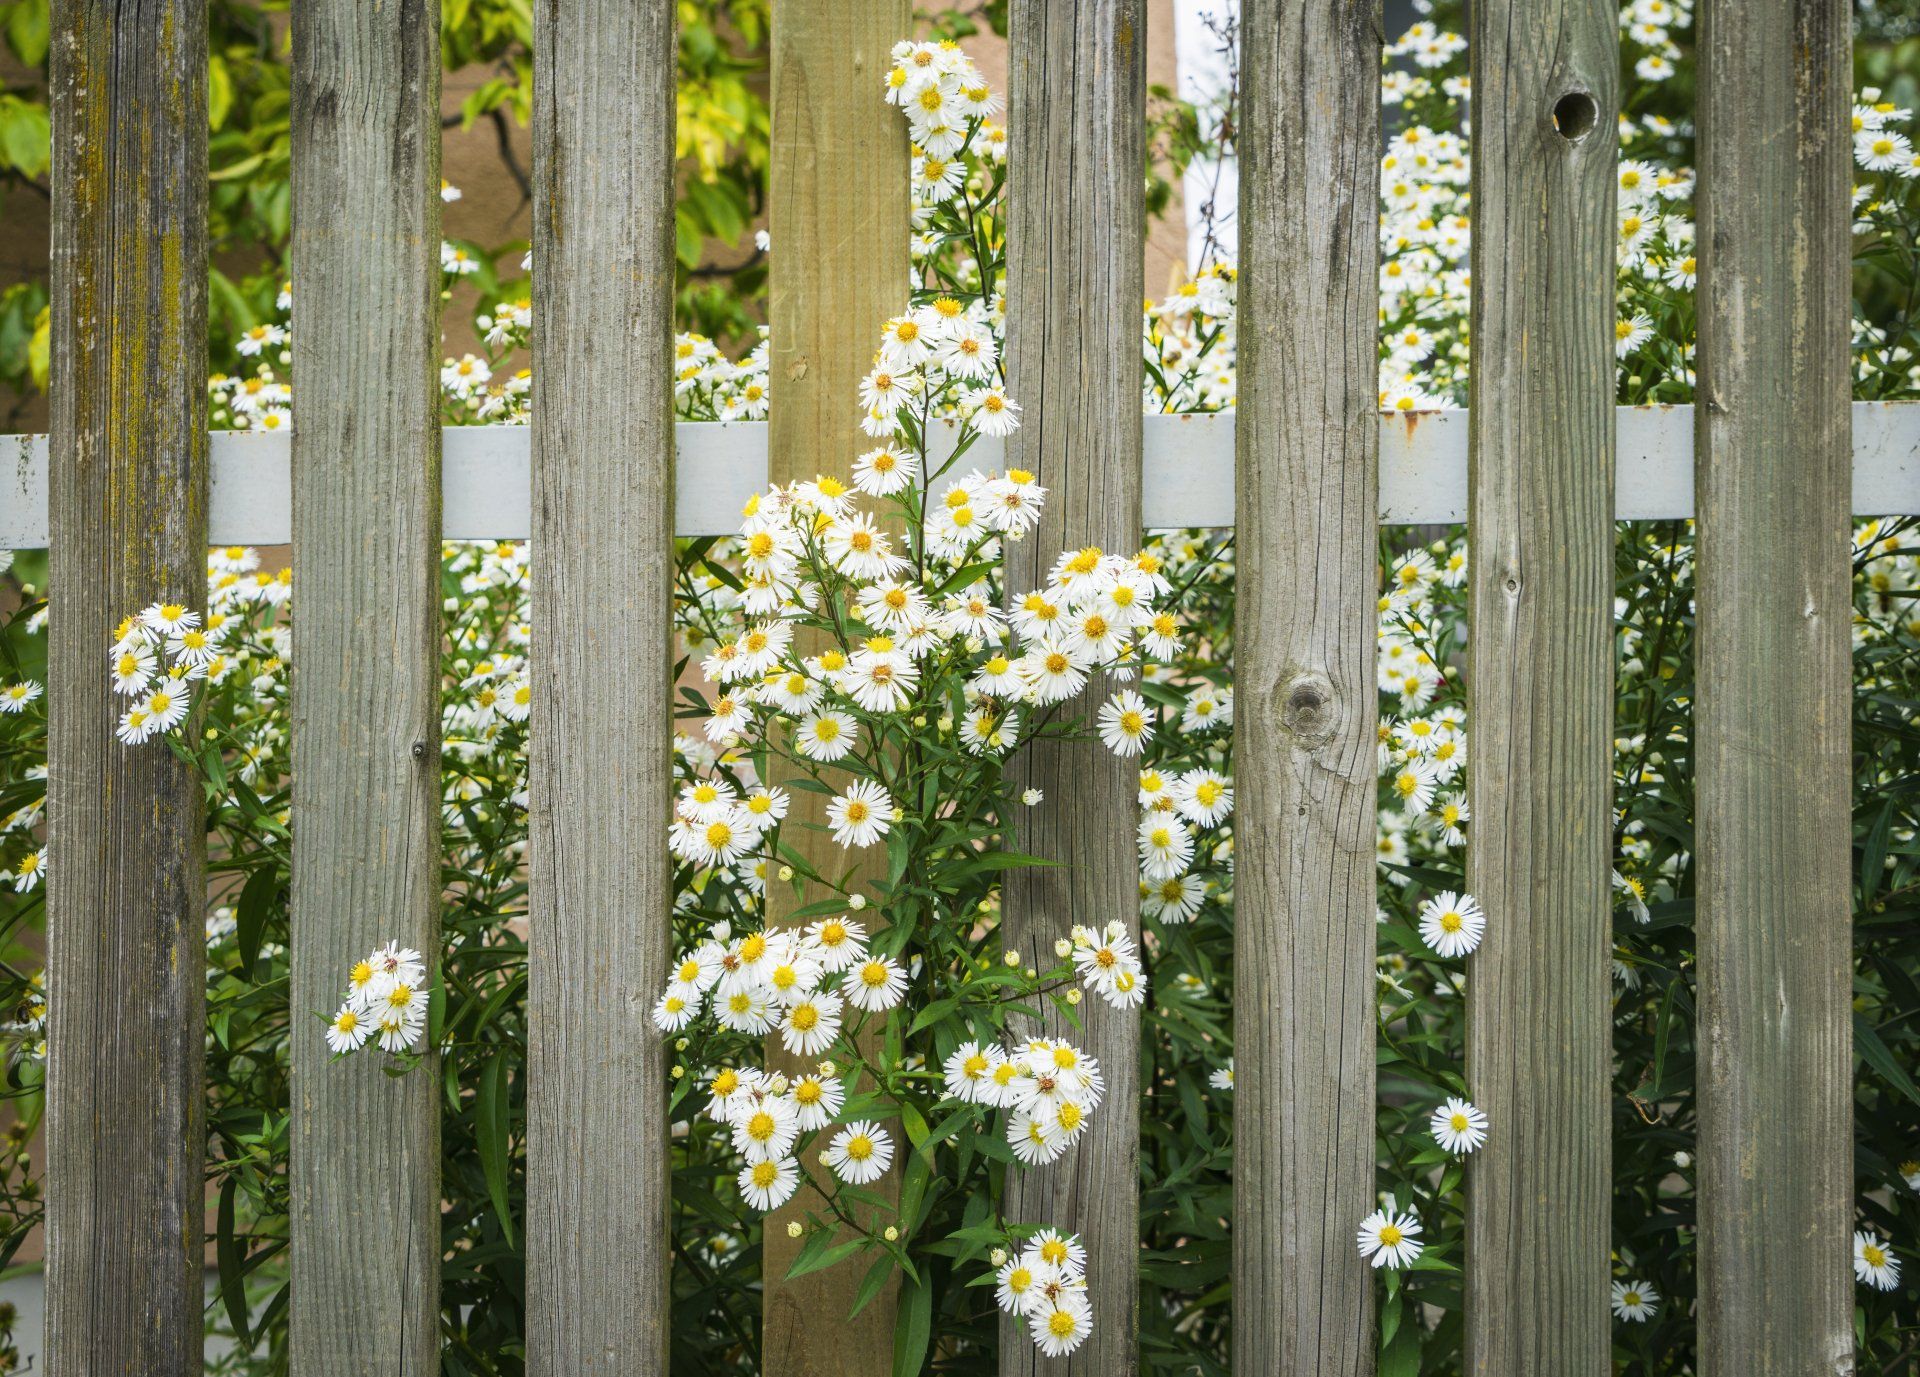 flowers in the fence